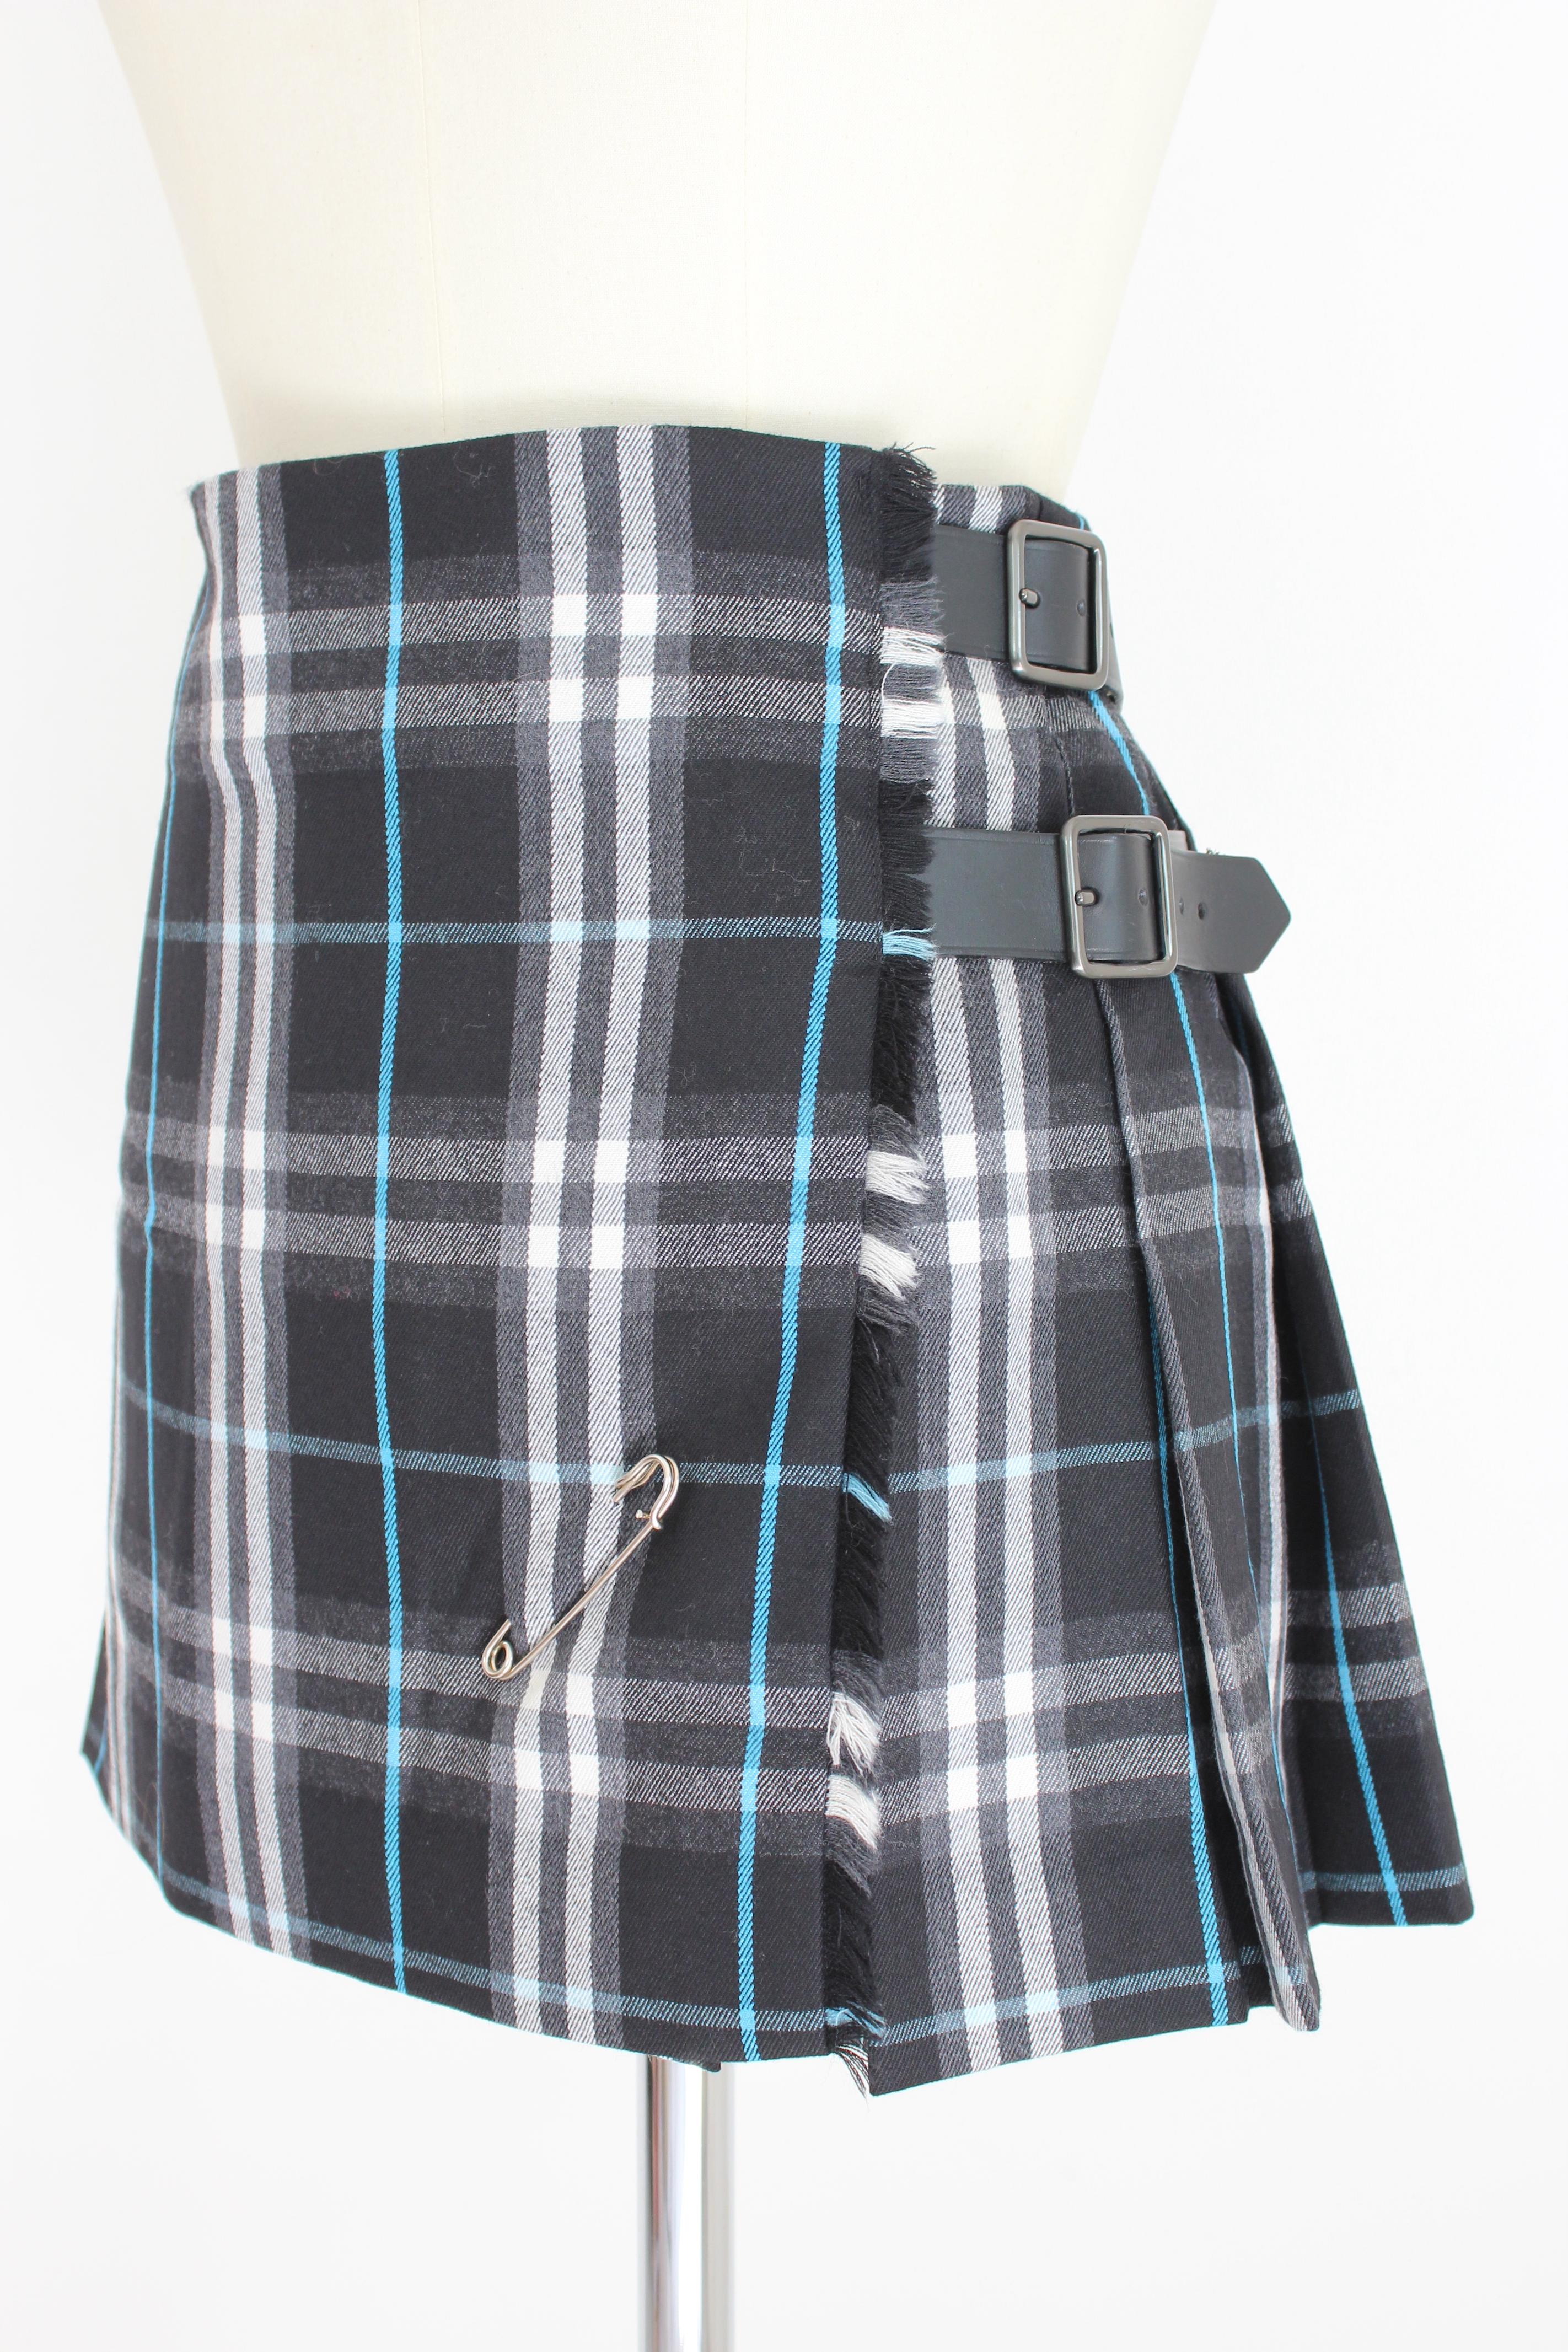 Burberry 2000s skirt. Wrap skirt, knee length, tartan kilt model with checked pattern. Black and white color. Internal velcro closure and two belts. Pin applied. 100% wool fabric. Made in Scotland.

Condition: Excellent

Article used few times, it